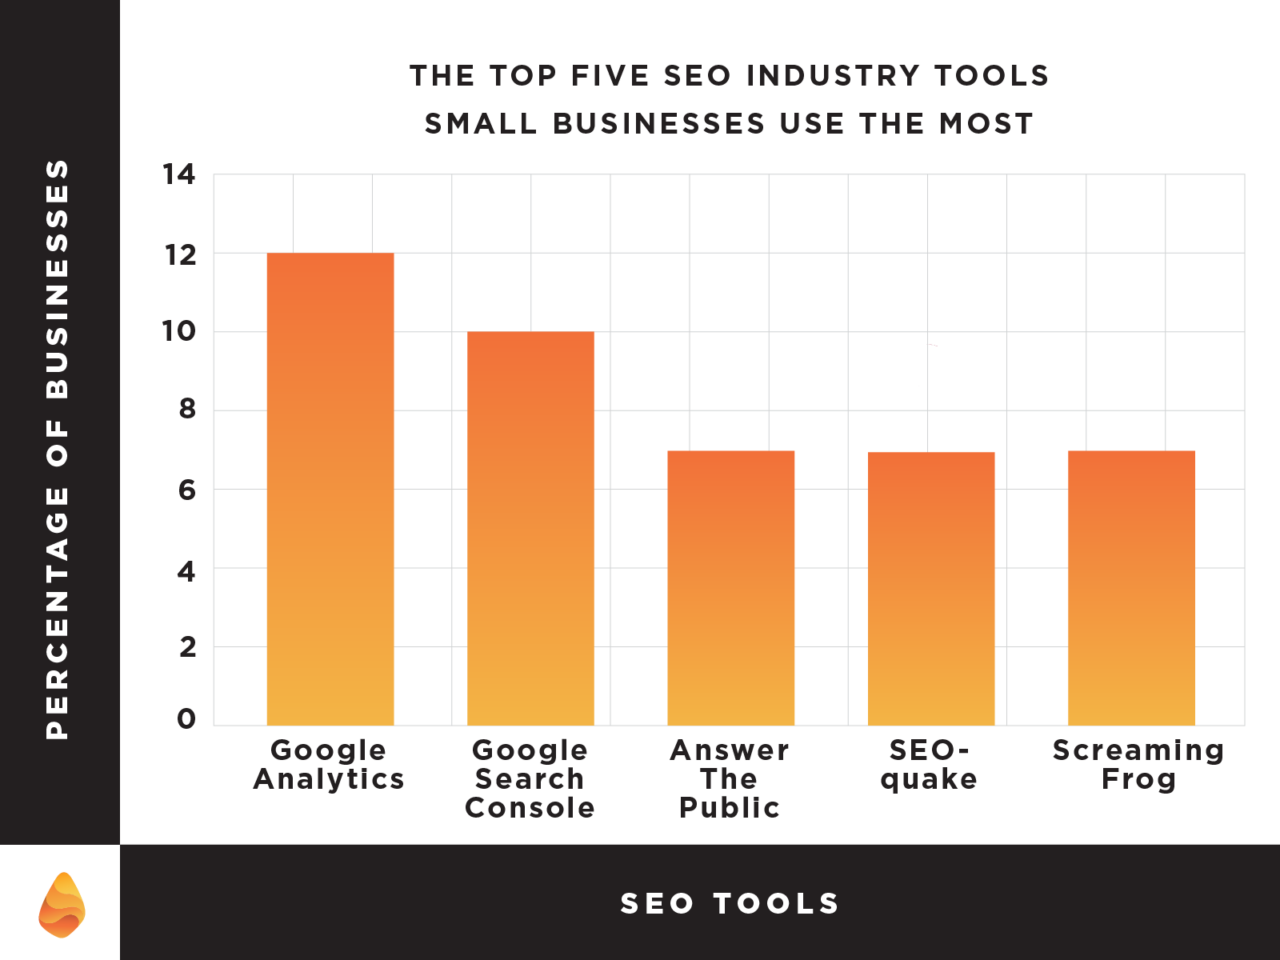 Graph showing top 5 SEO tools small businesses use the most (Google Analytics, Google Search Console, Answer the Public, SEOquake, Screaming Frog)